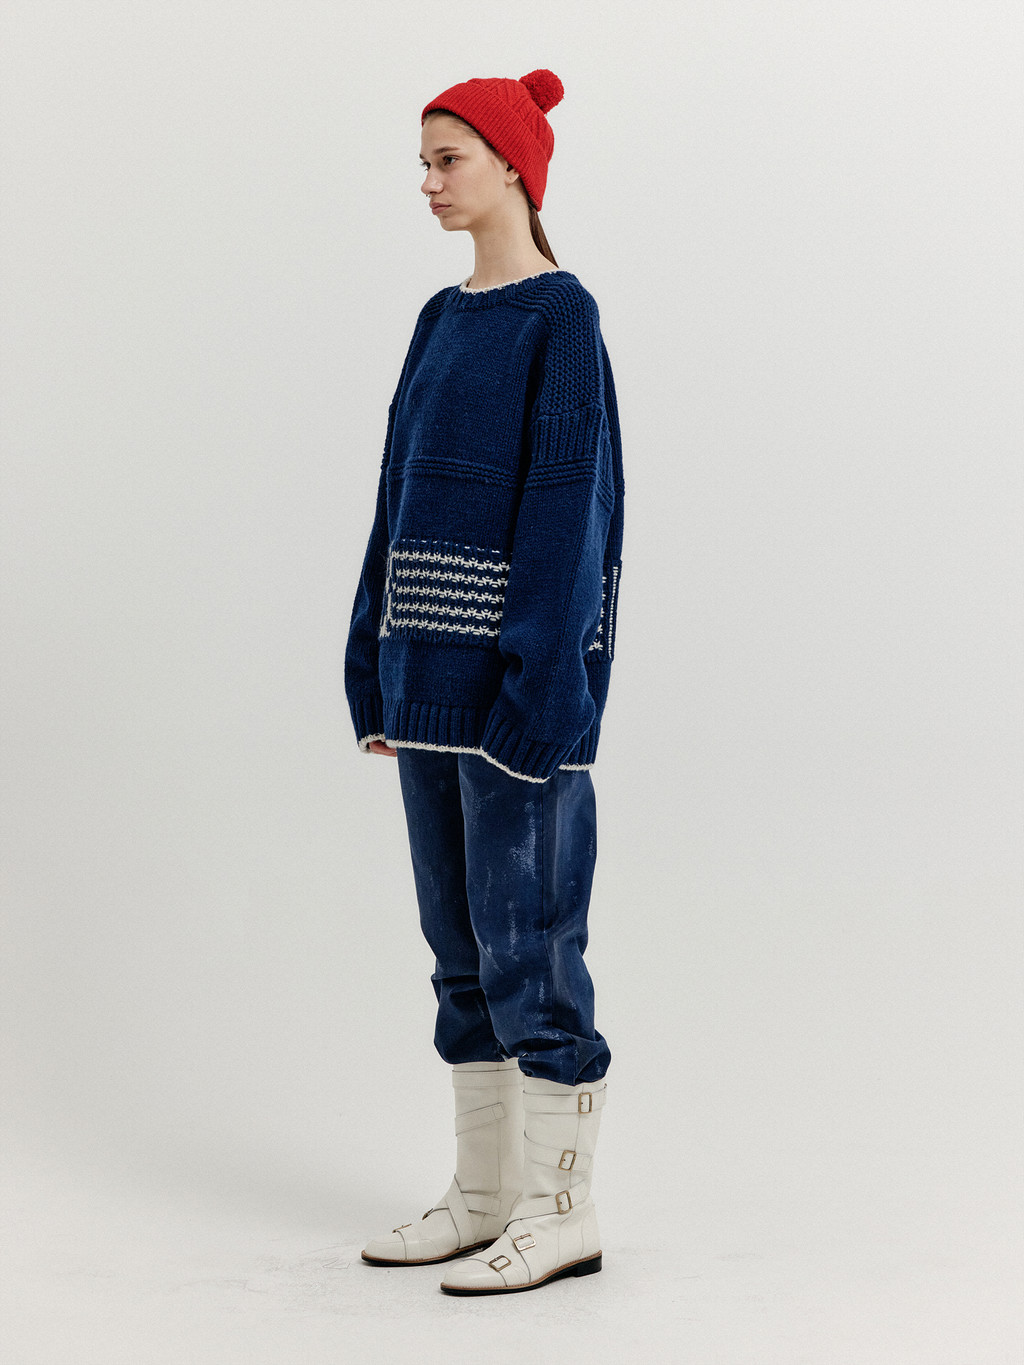 EENK Xanthe Jacquard Knit Pullover - Navy by W Concept